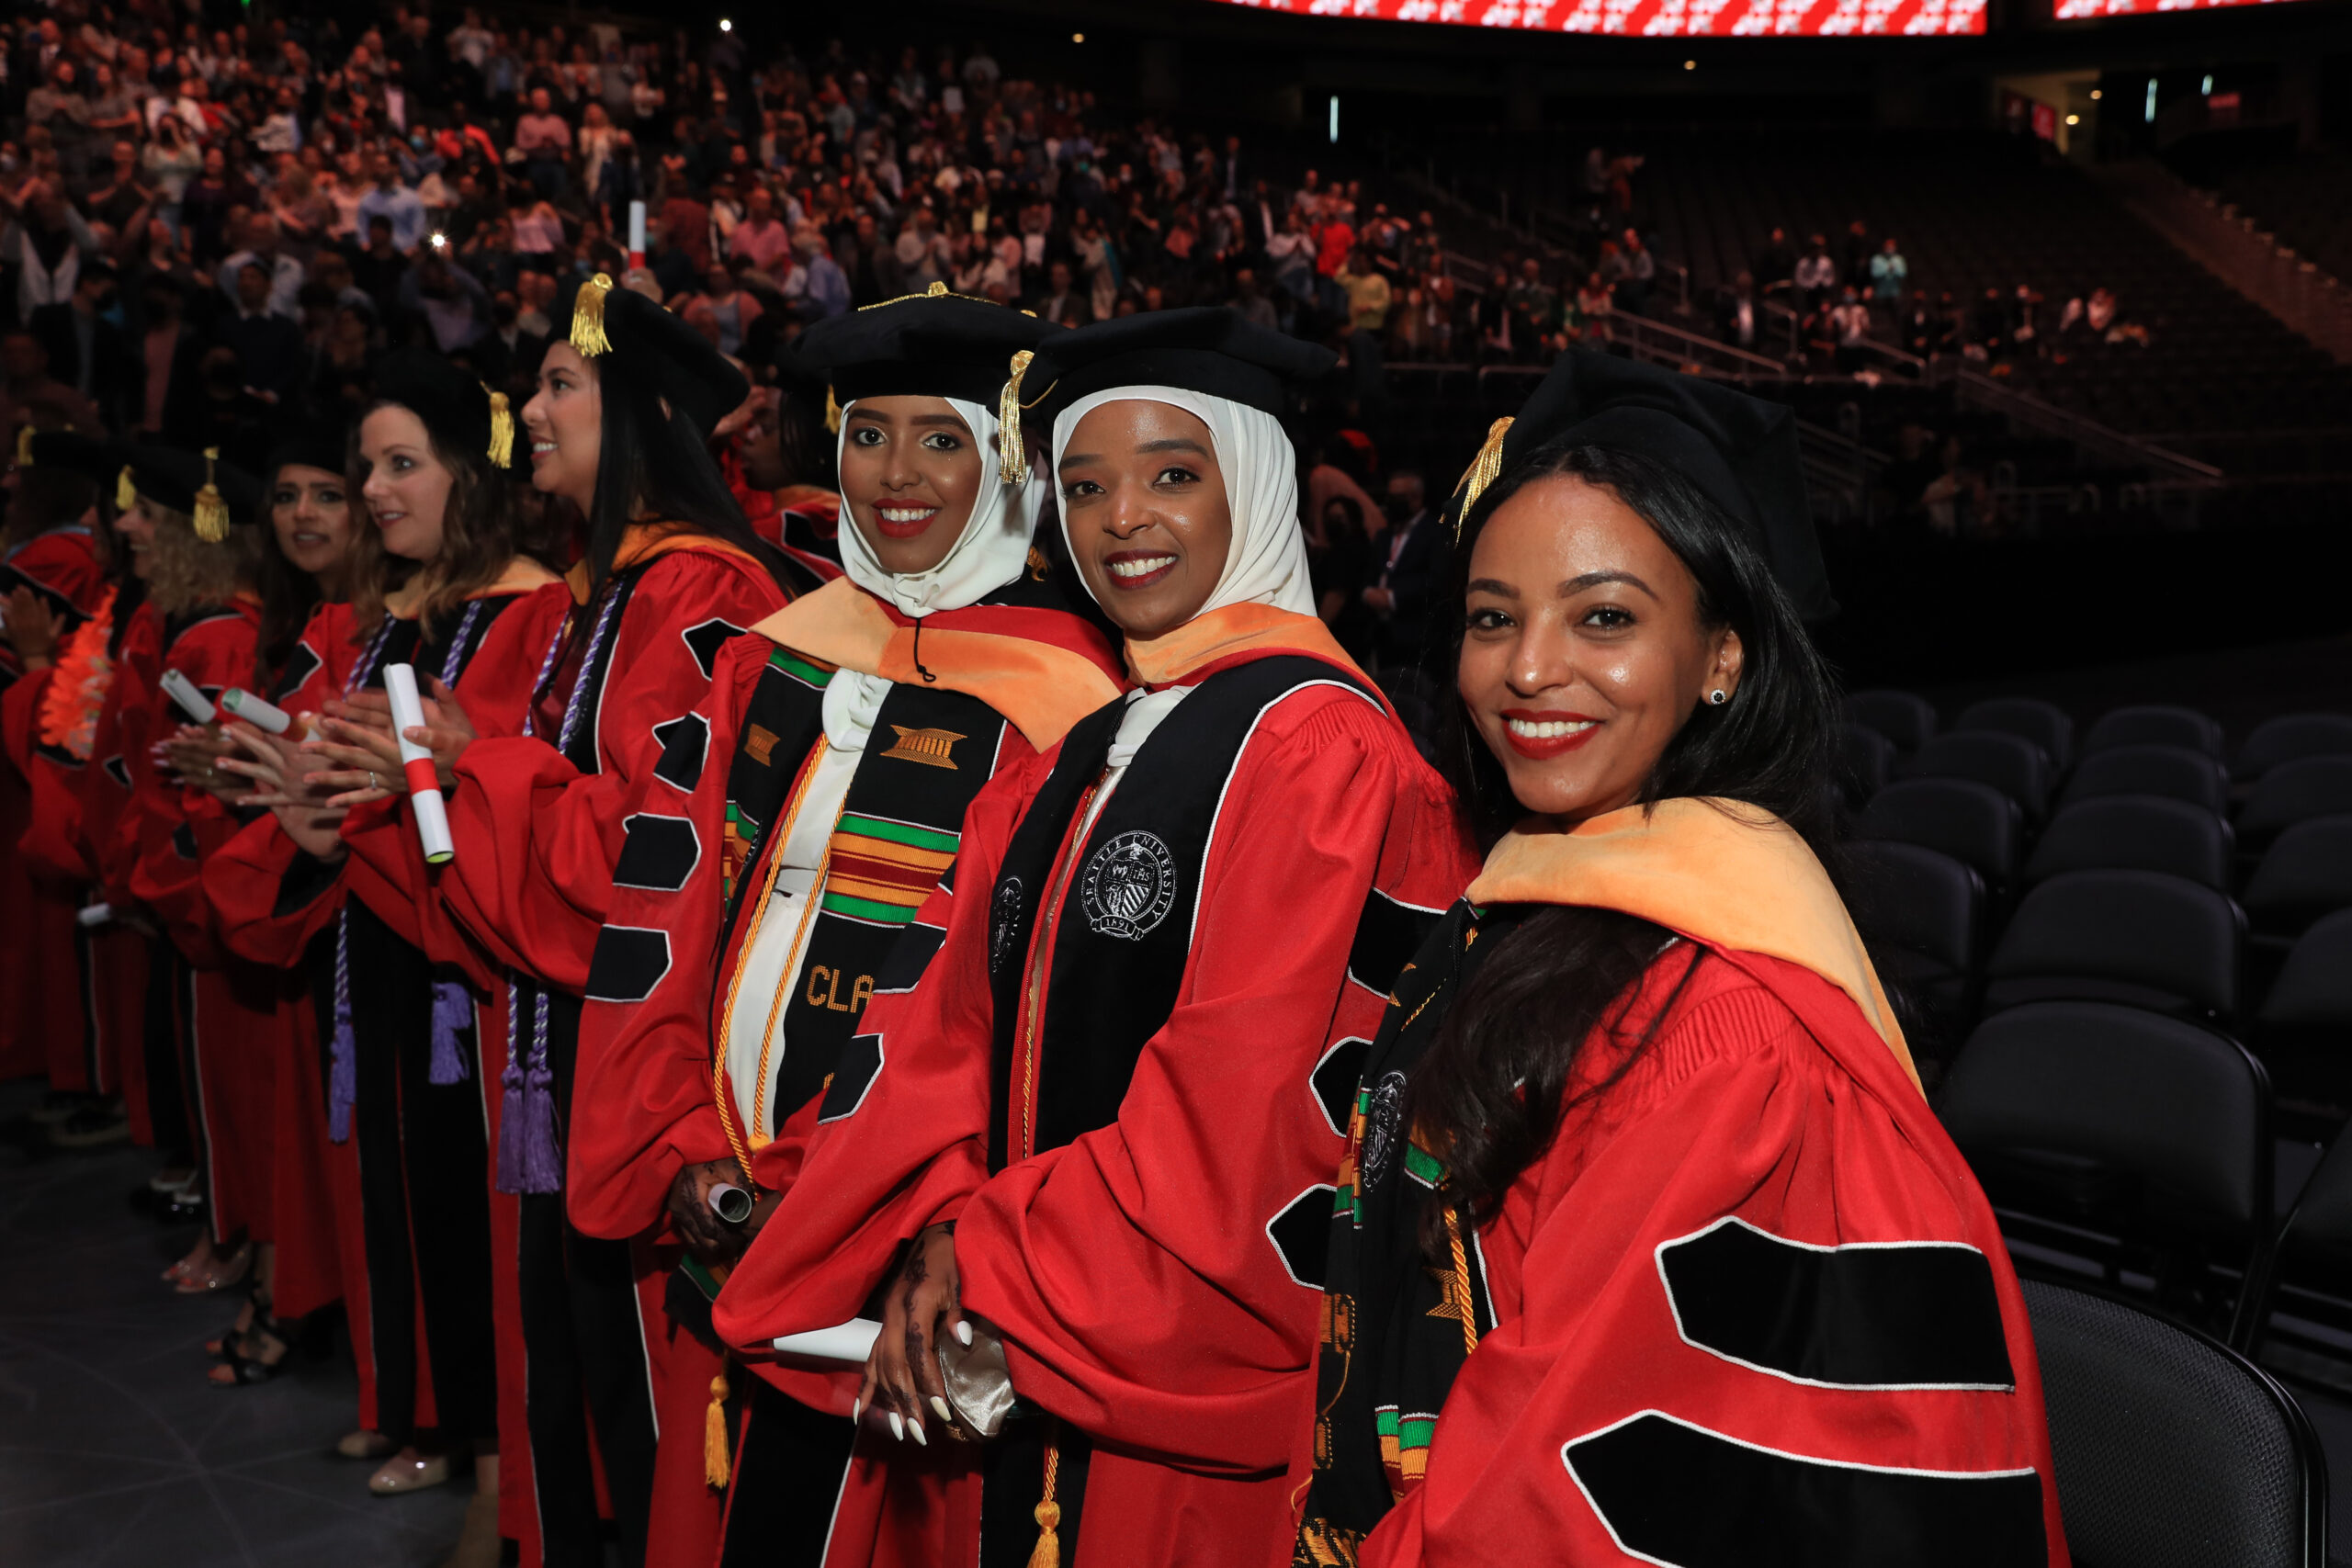 June 12th, 2022 - The 2022 Seattle University graduation at Climate Pledge Arena in Seattle, Wash.Photo by: Yosef Kalinko